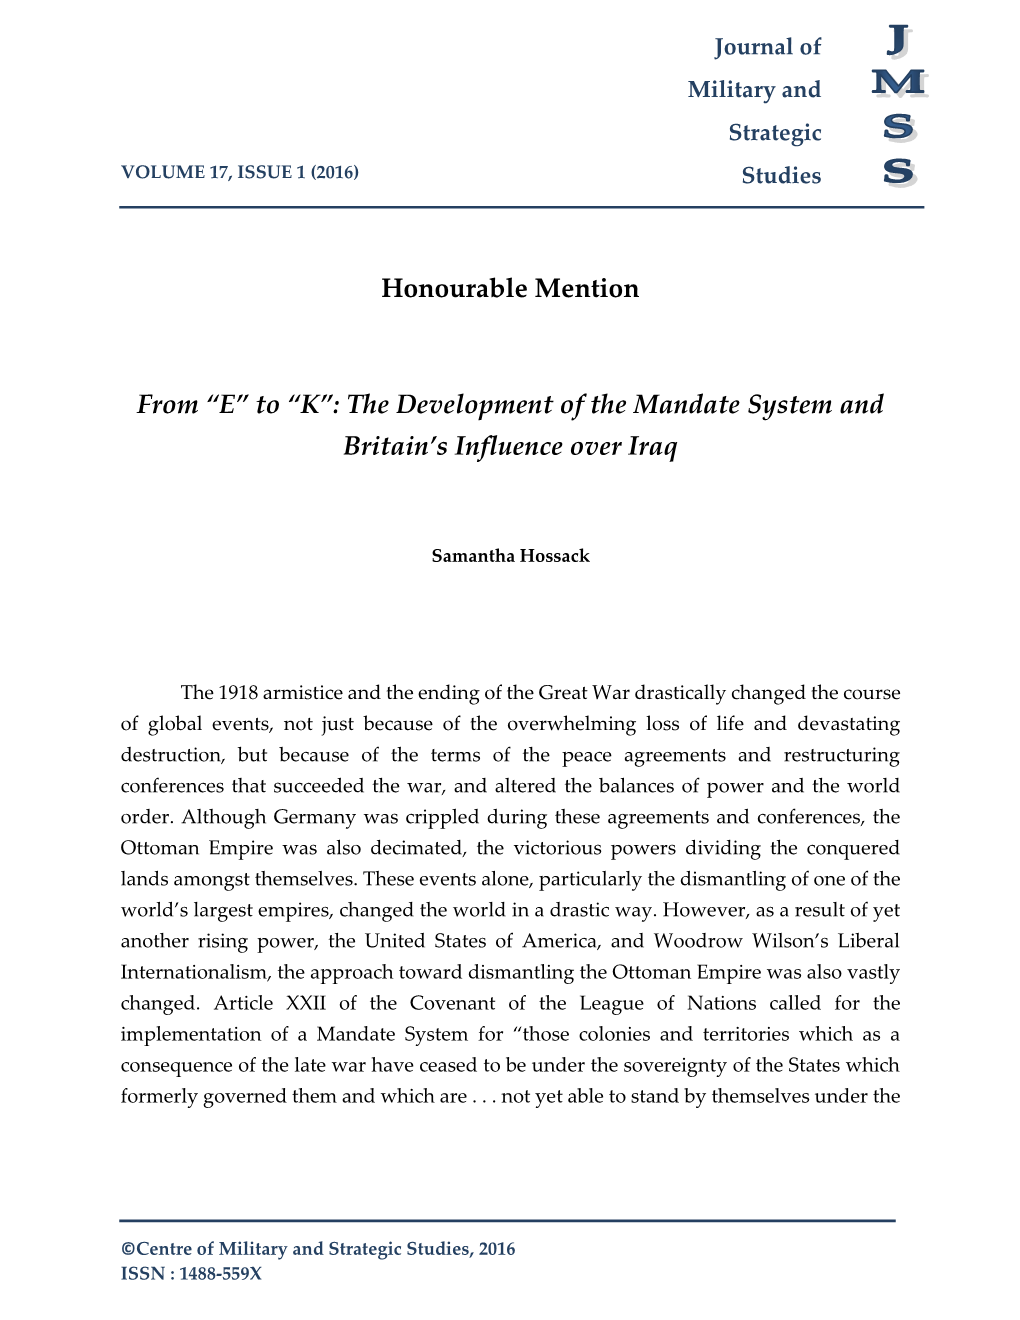 Honourable Mention from “E” to “K”: the Development of the Mandate System and Britain's Influence Over Iraq